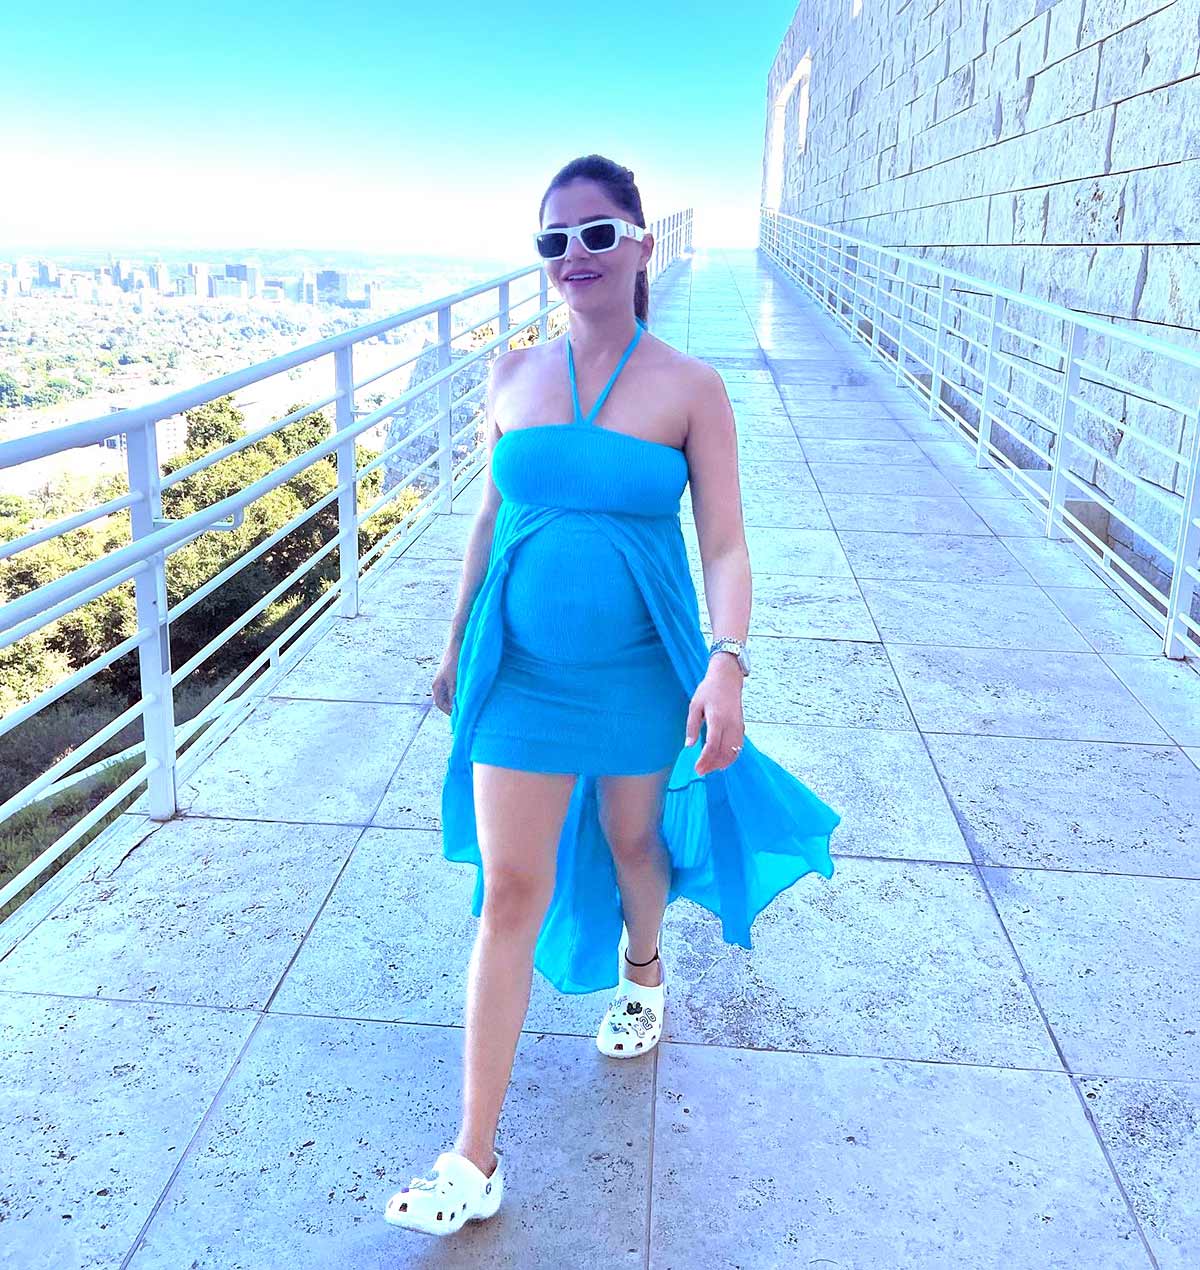 Rubina Dilaik ups the glam quotient in a cut-out dress with a deep